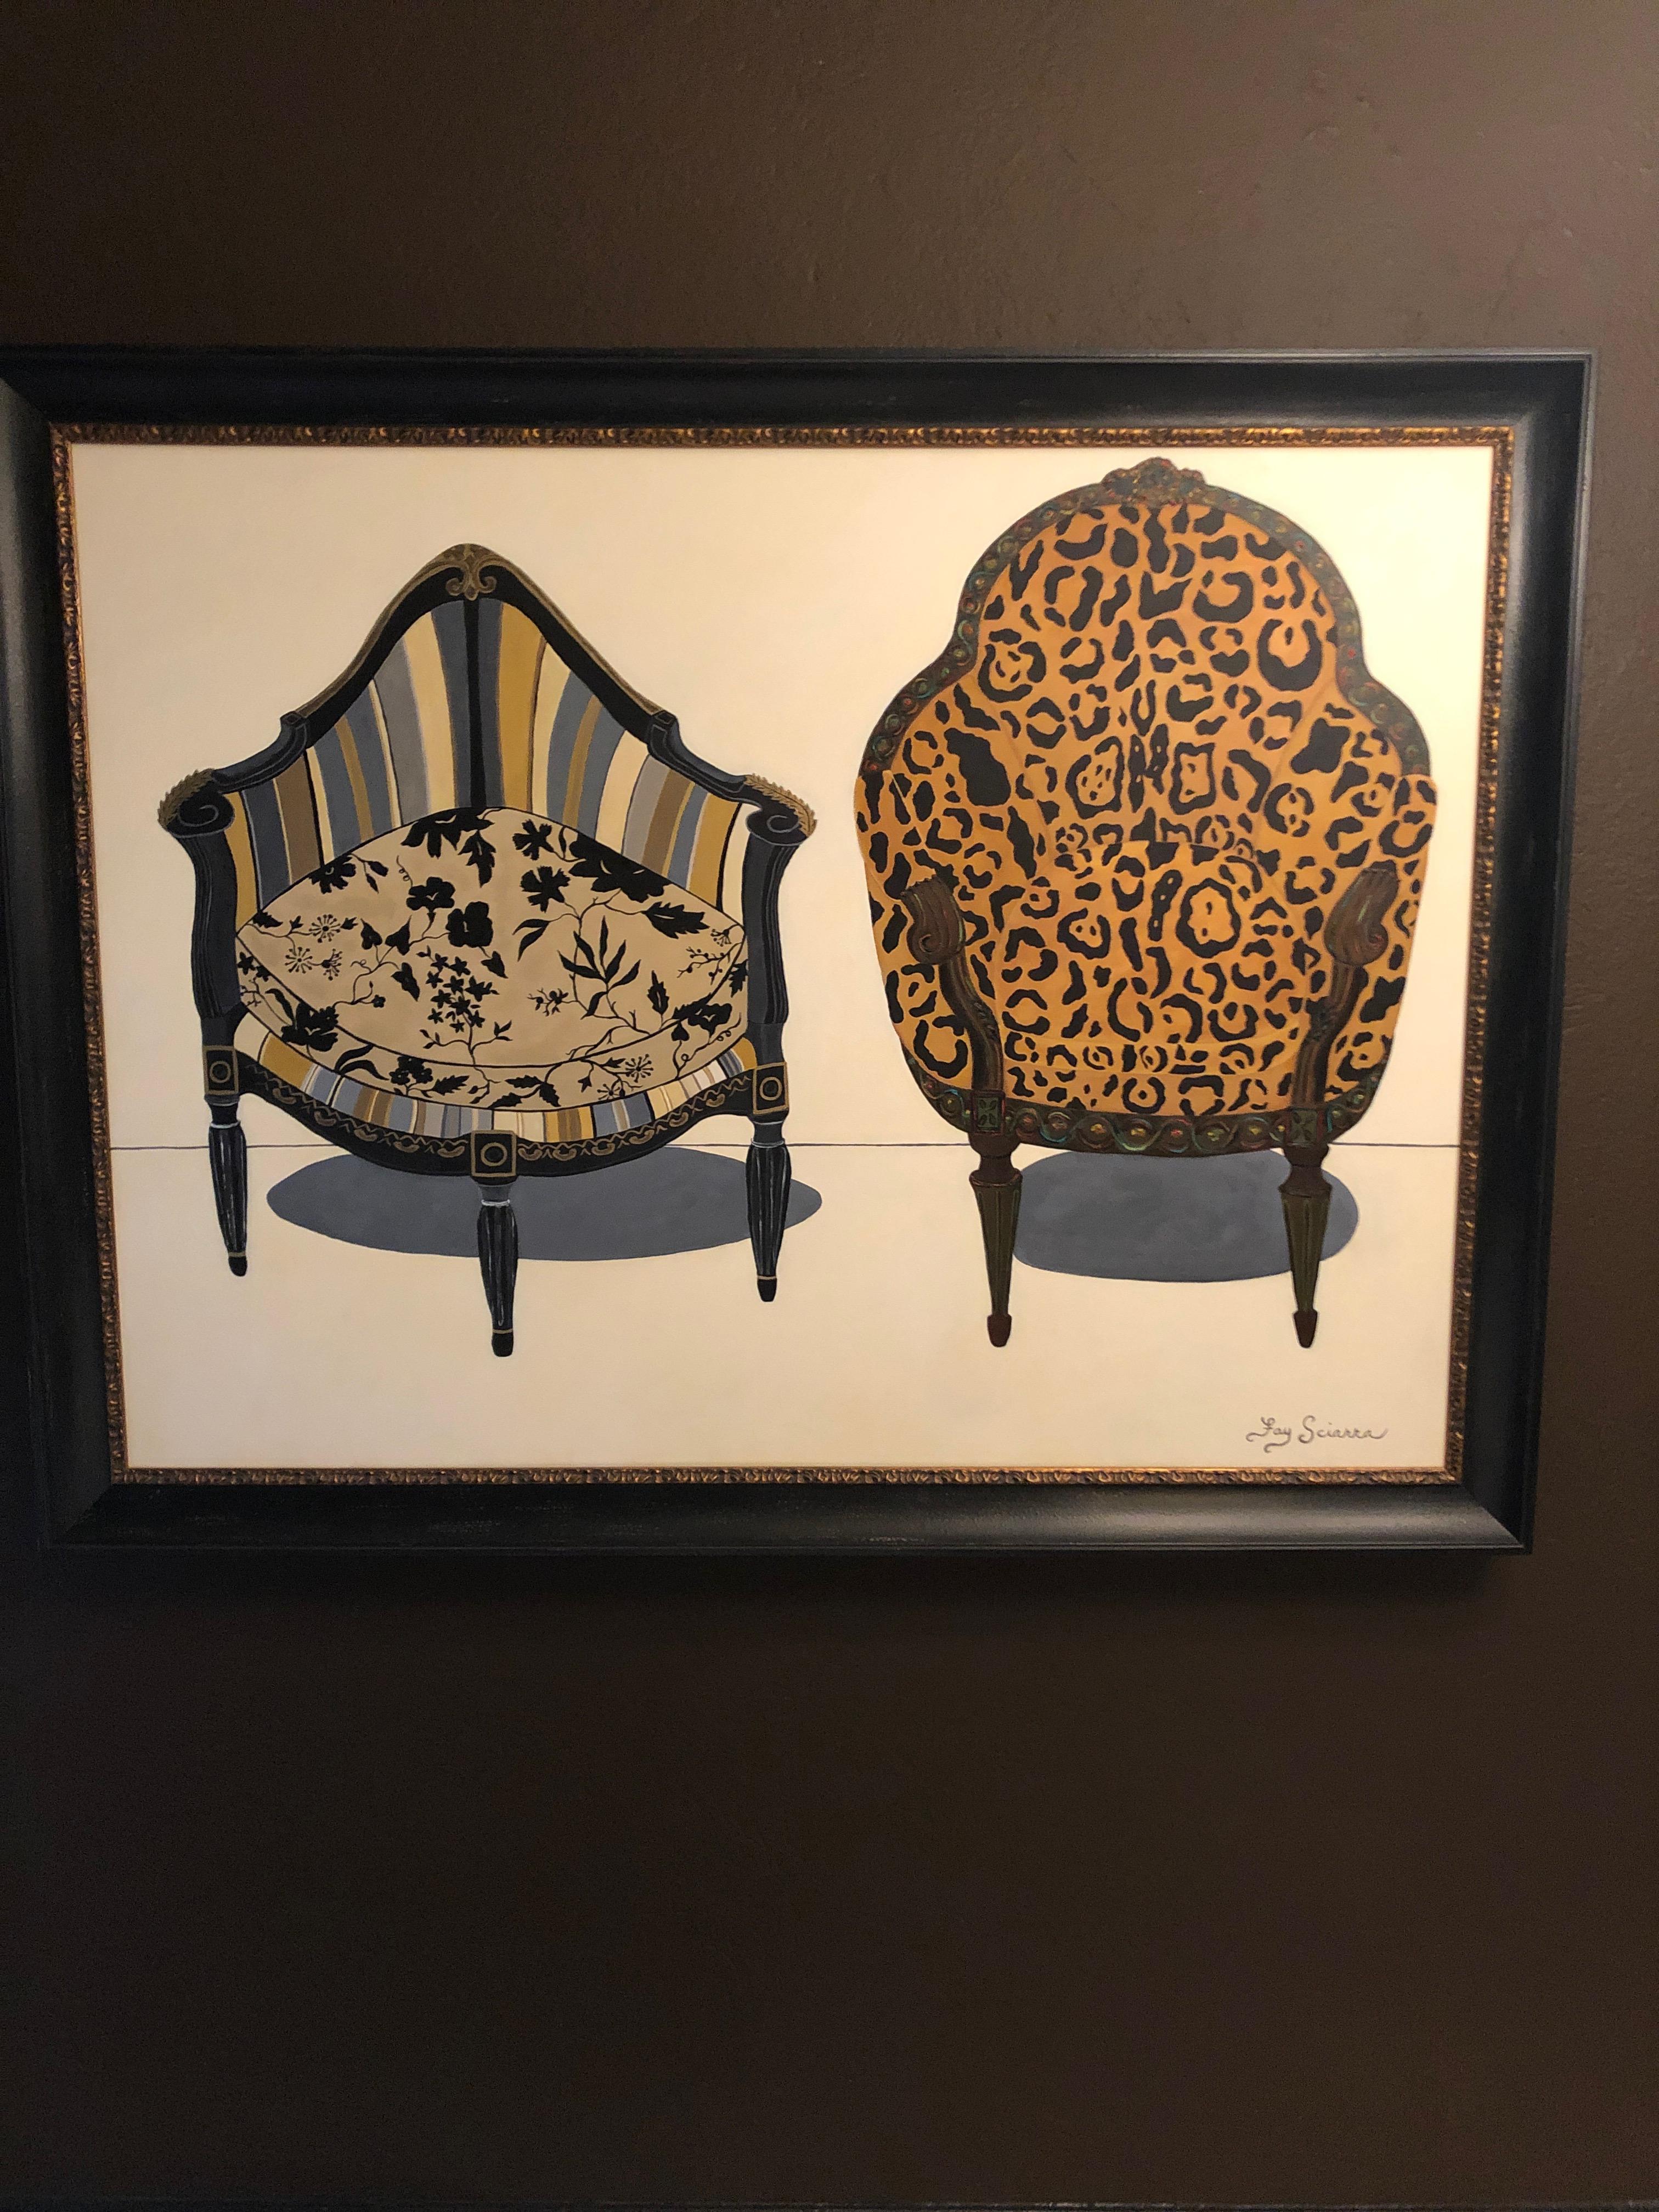 Very striking bold contemporary acrylic on canvas. Two antique chairs contemporized in animal print fabrics. Gorgeous wood and gilded custom frame.